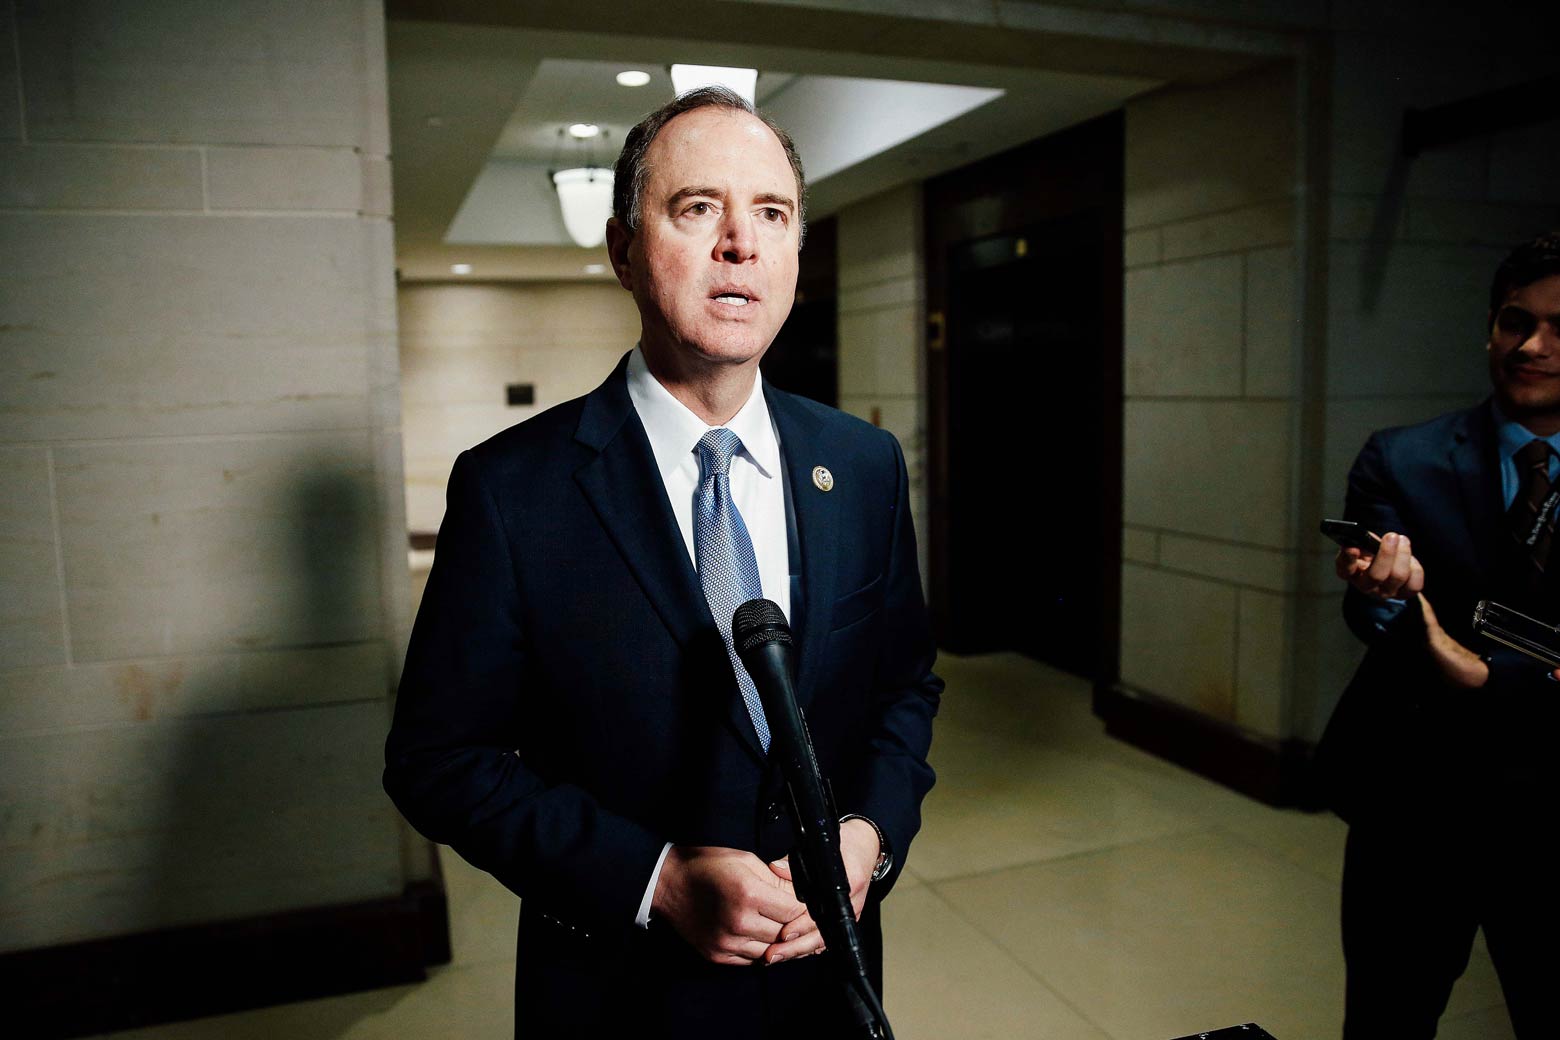 Ranking Member of the House Intelligence Committee Adam Schiff speaks after Attorney General Jeff Sessions attended a closed door interview with the House Intelligence Committee on Capitol Hill in Washington, Nov. 30.